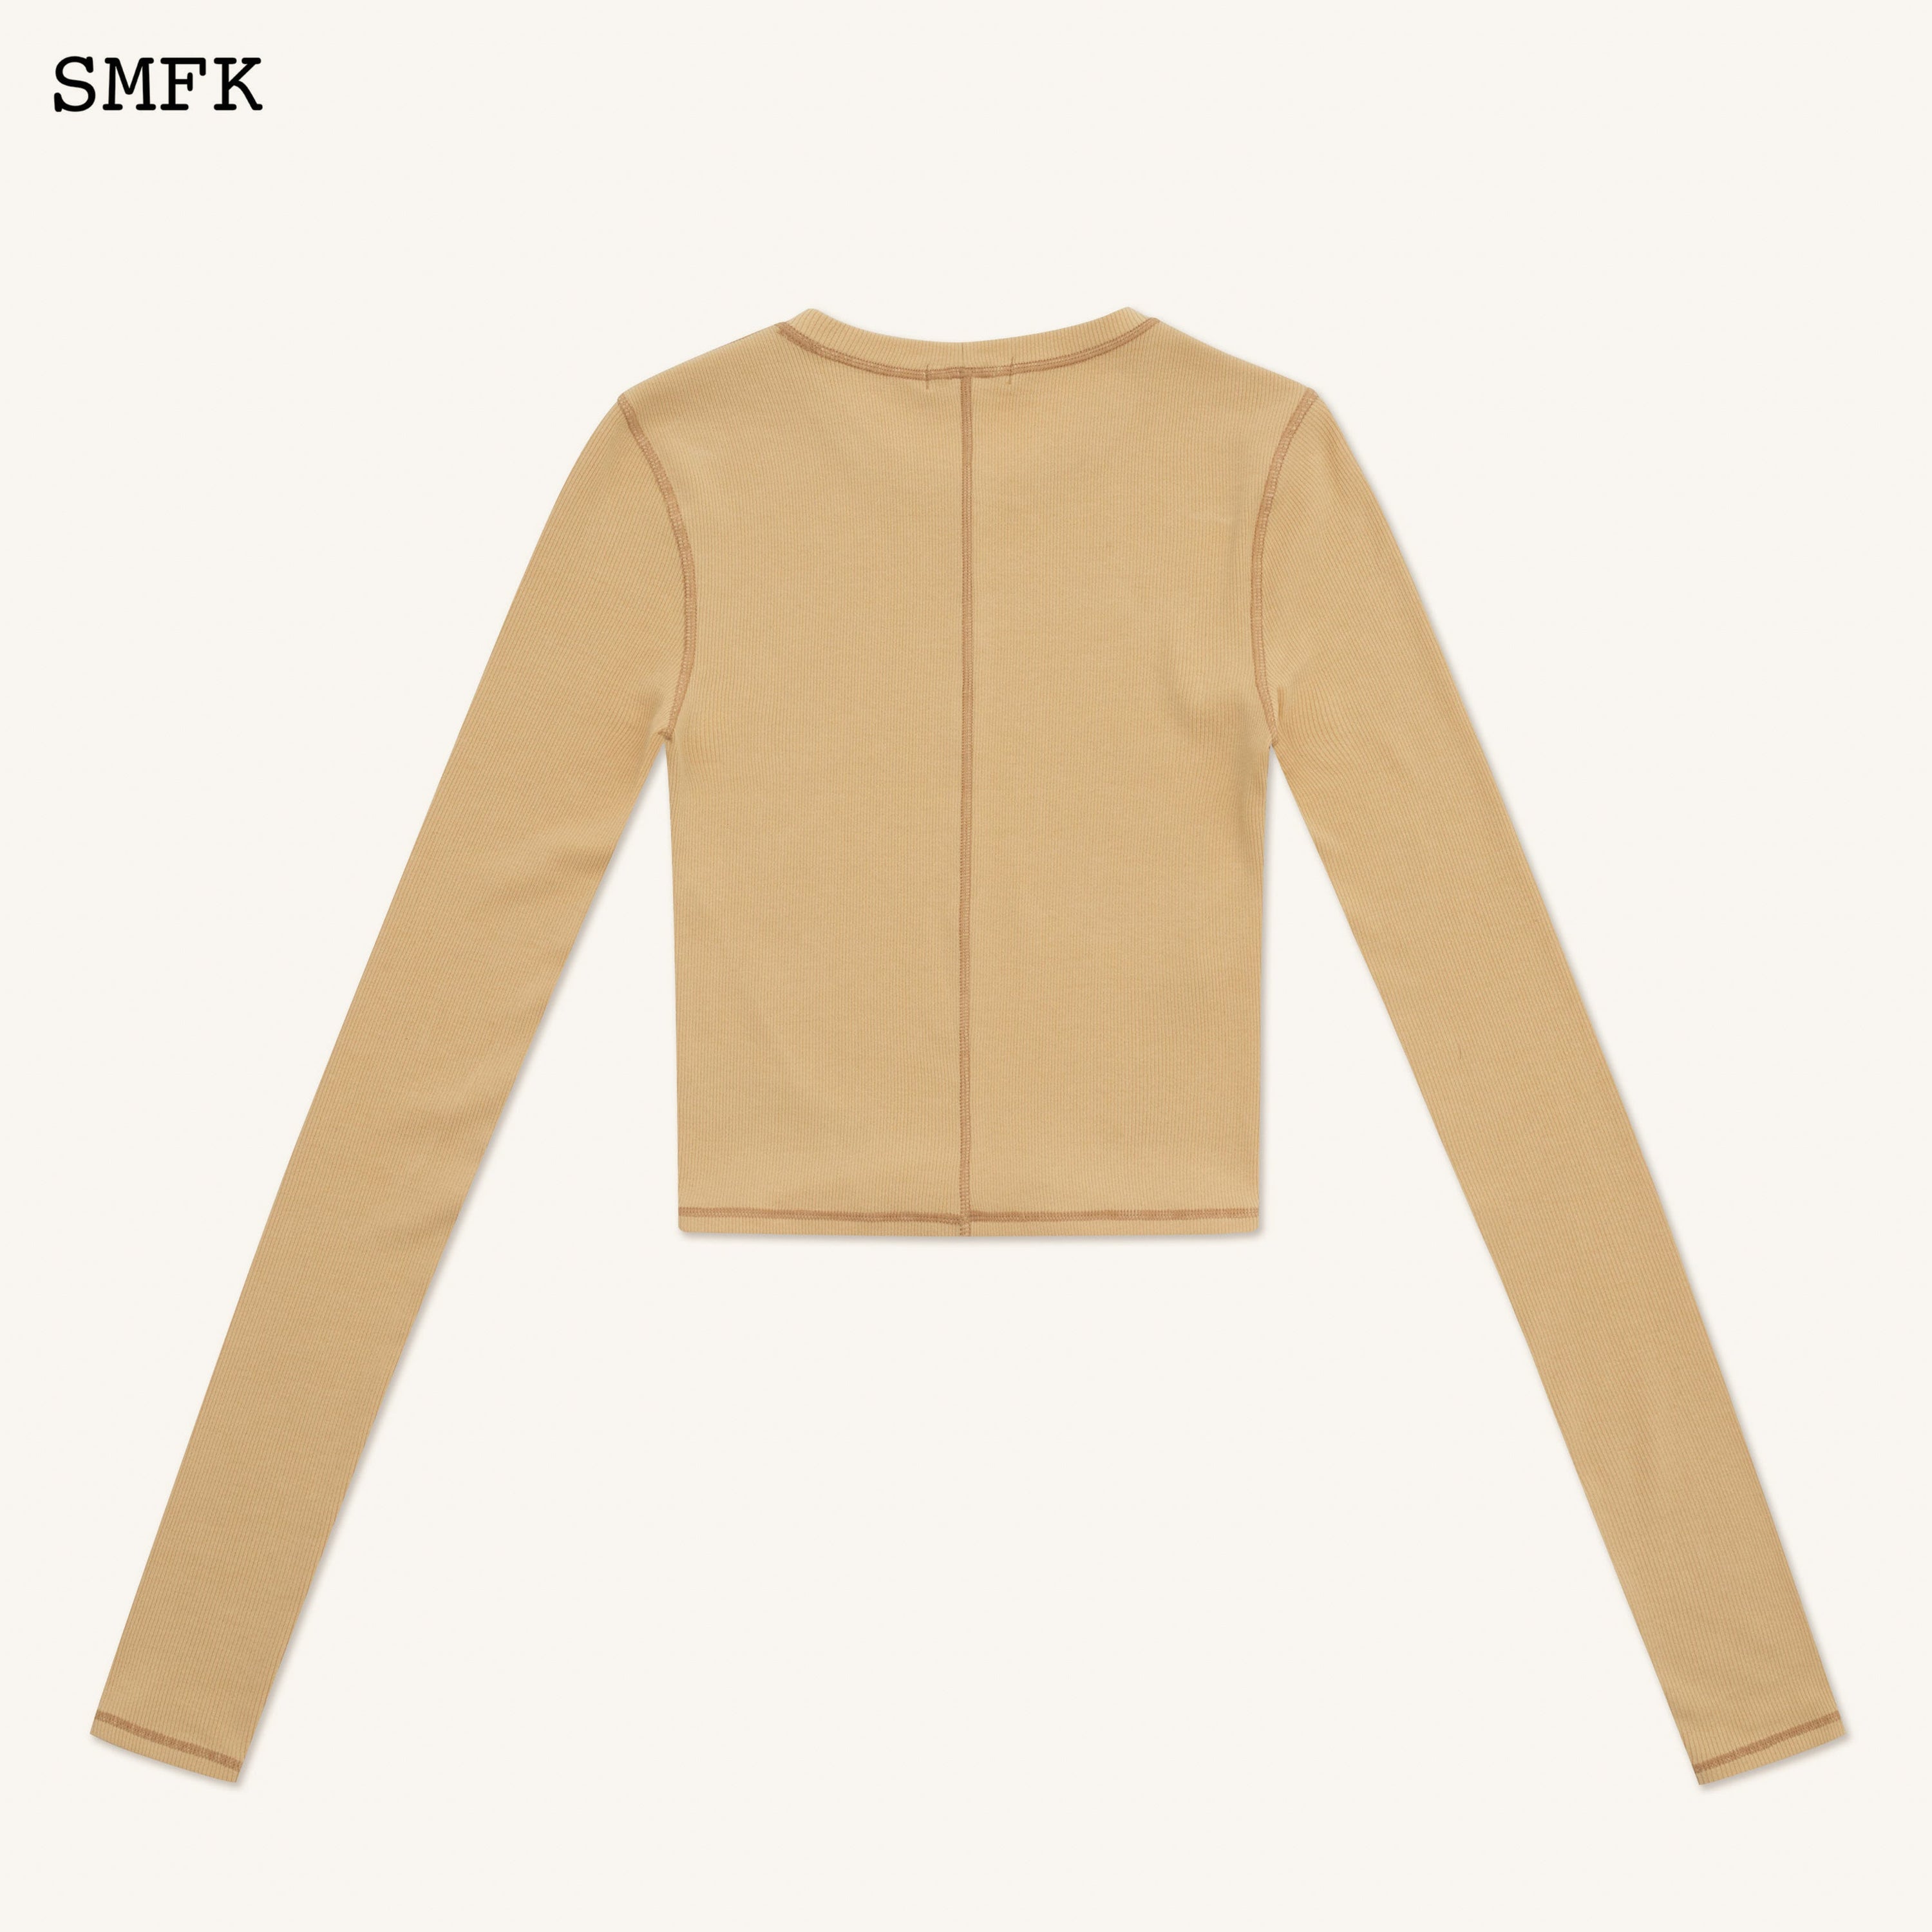 Compass Rush Slim Fit Sports Top In Sand - SMFK Official